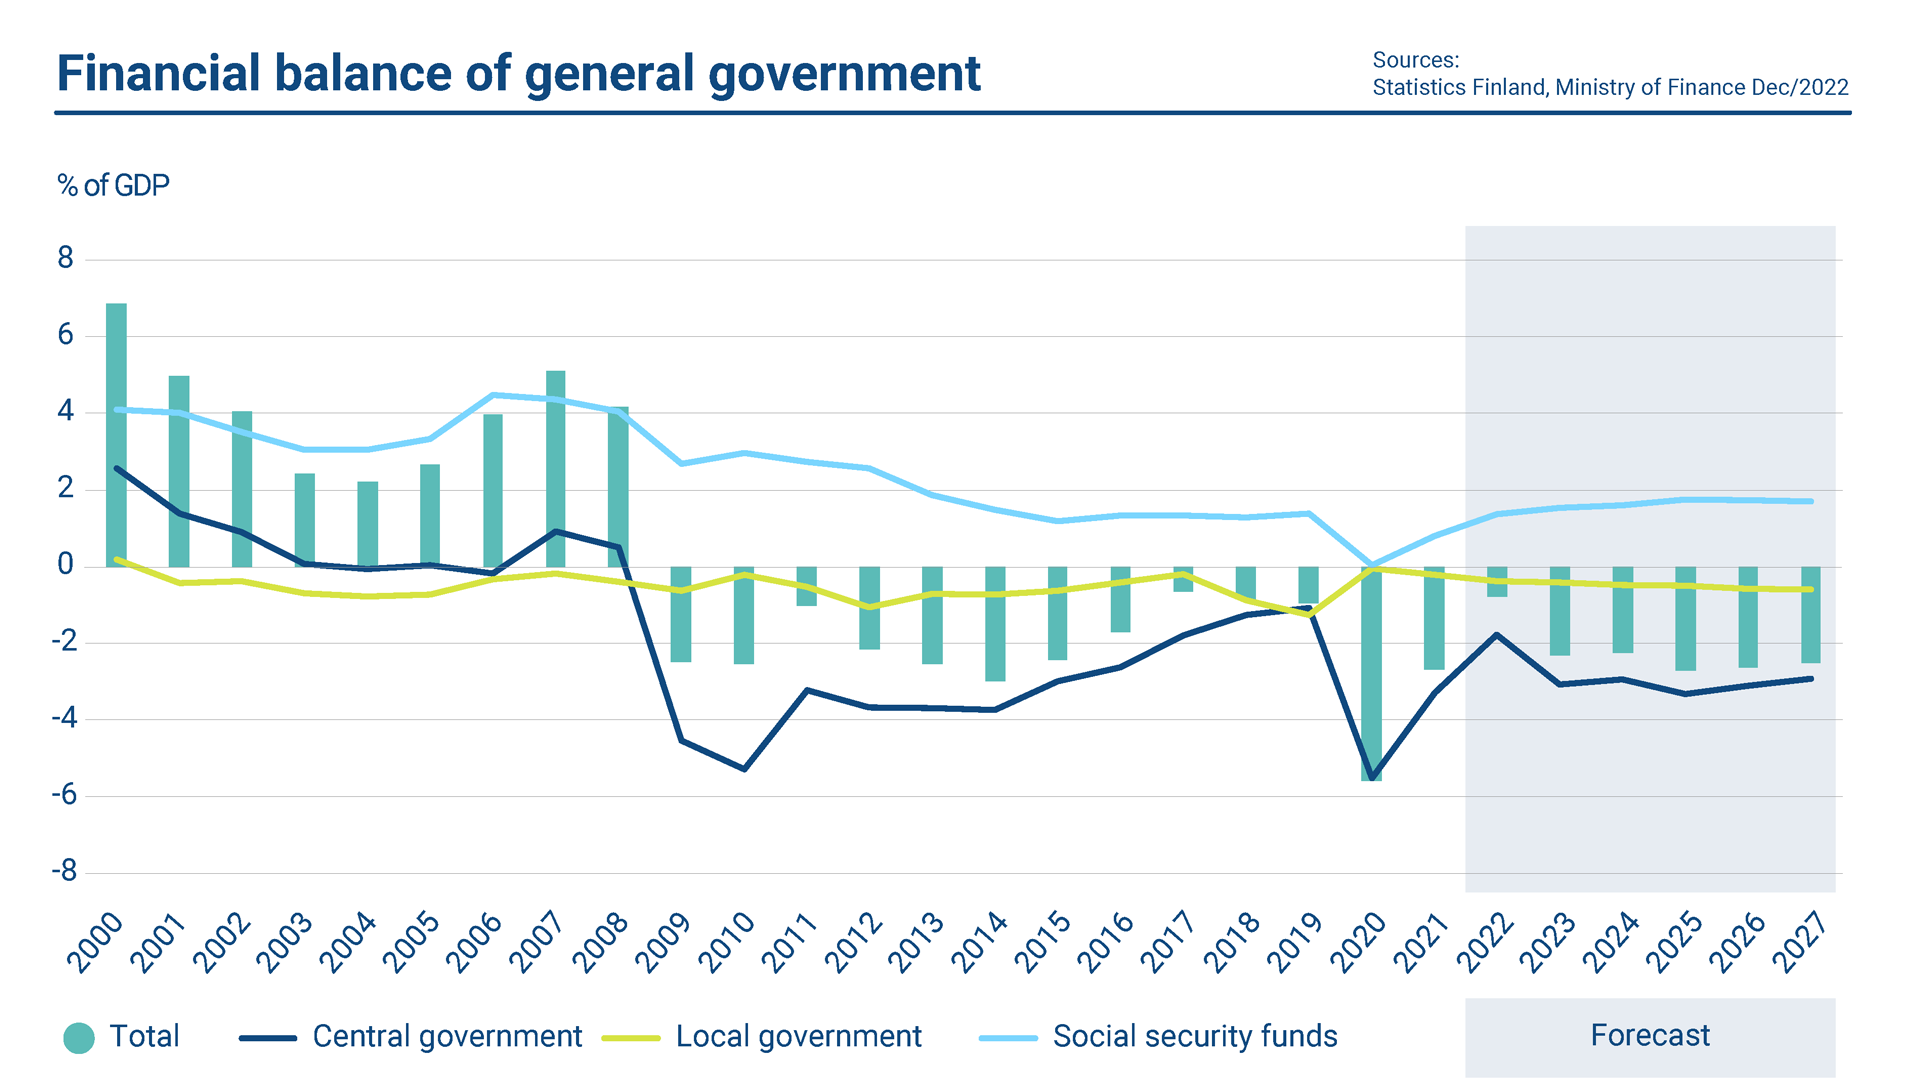 The graph shows the financial balance of the Finnish general government. Social security funds are usually running a surplus while central and local government show deficits.